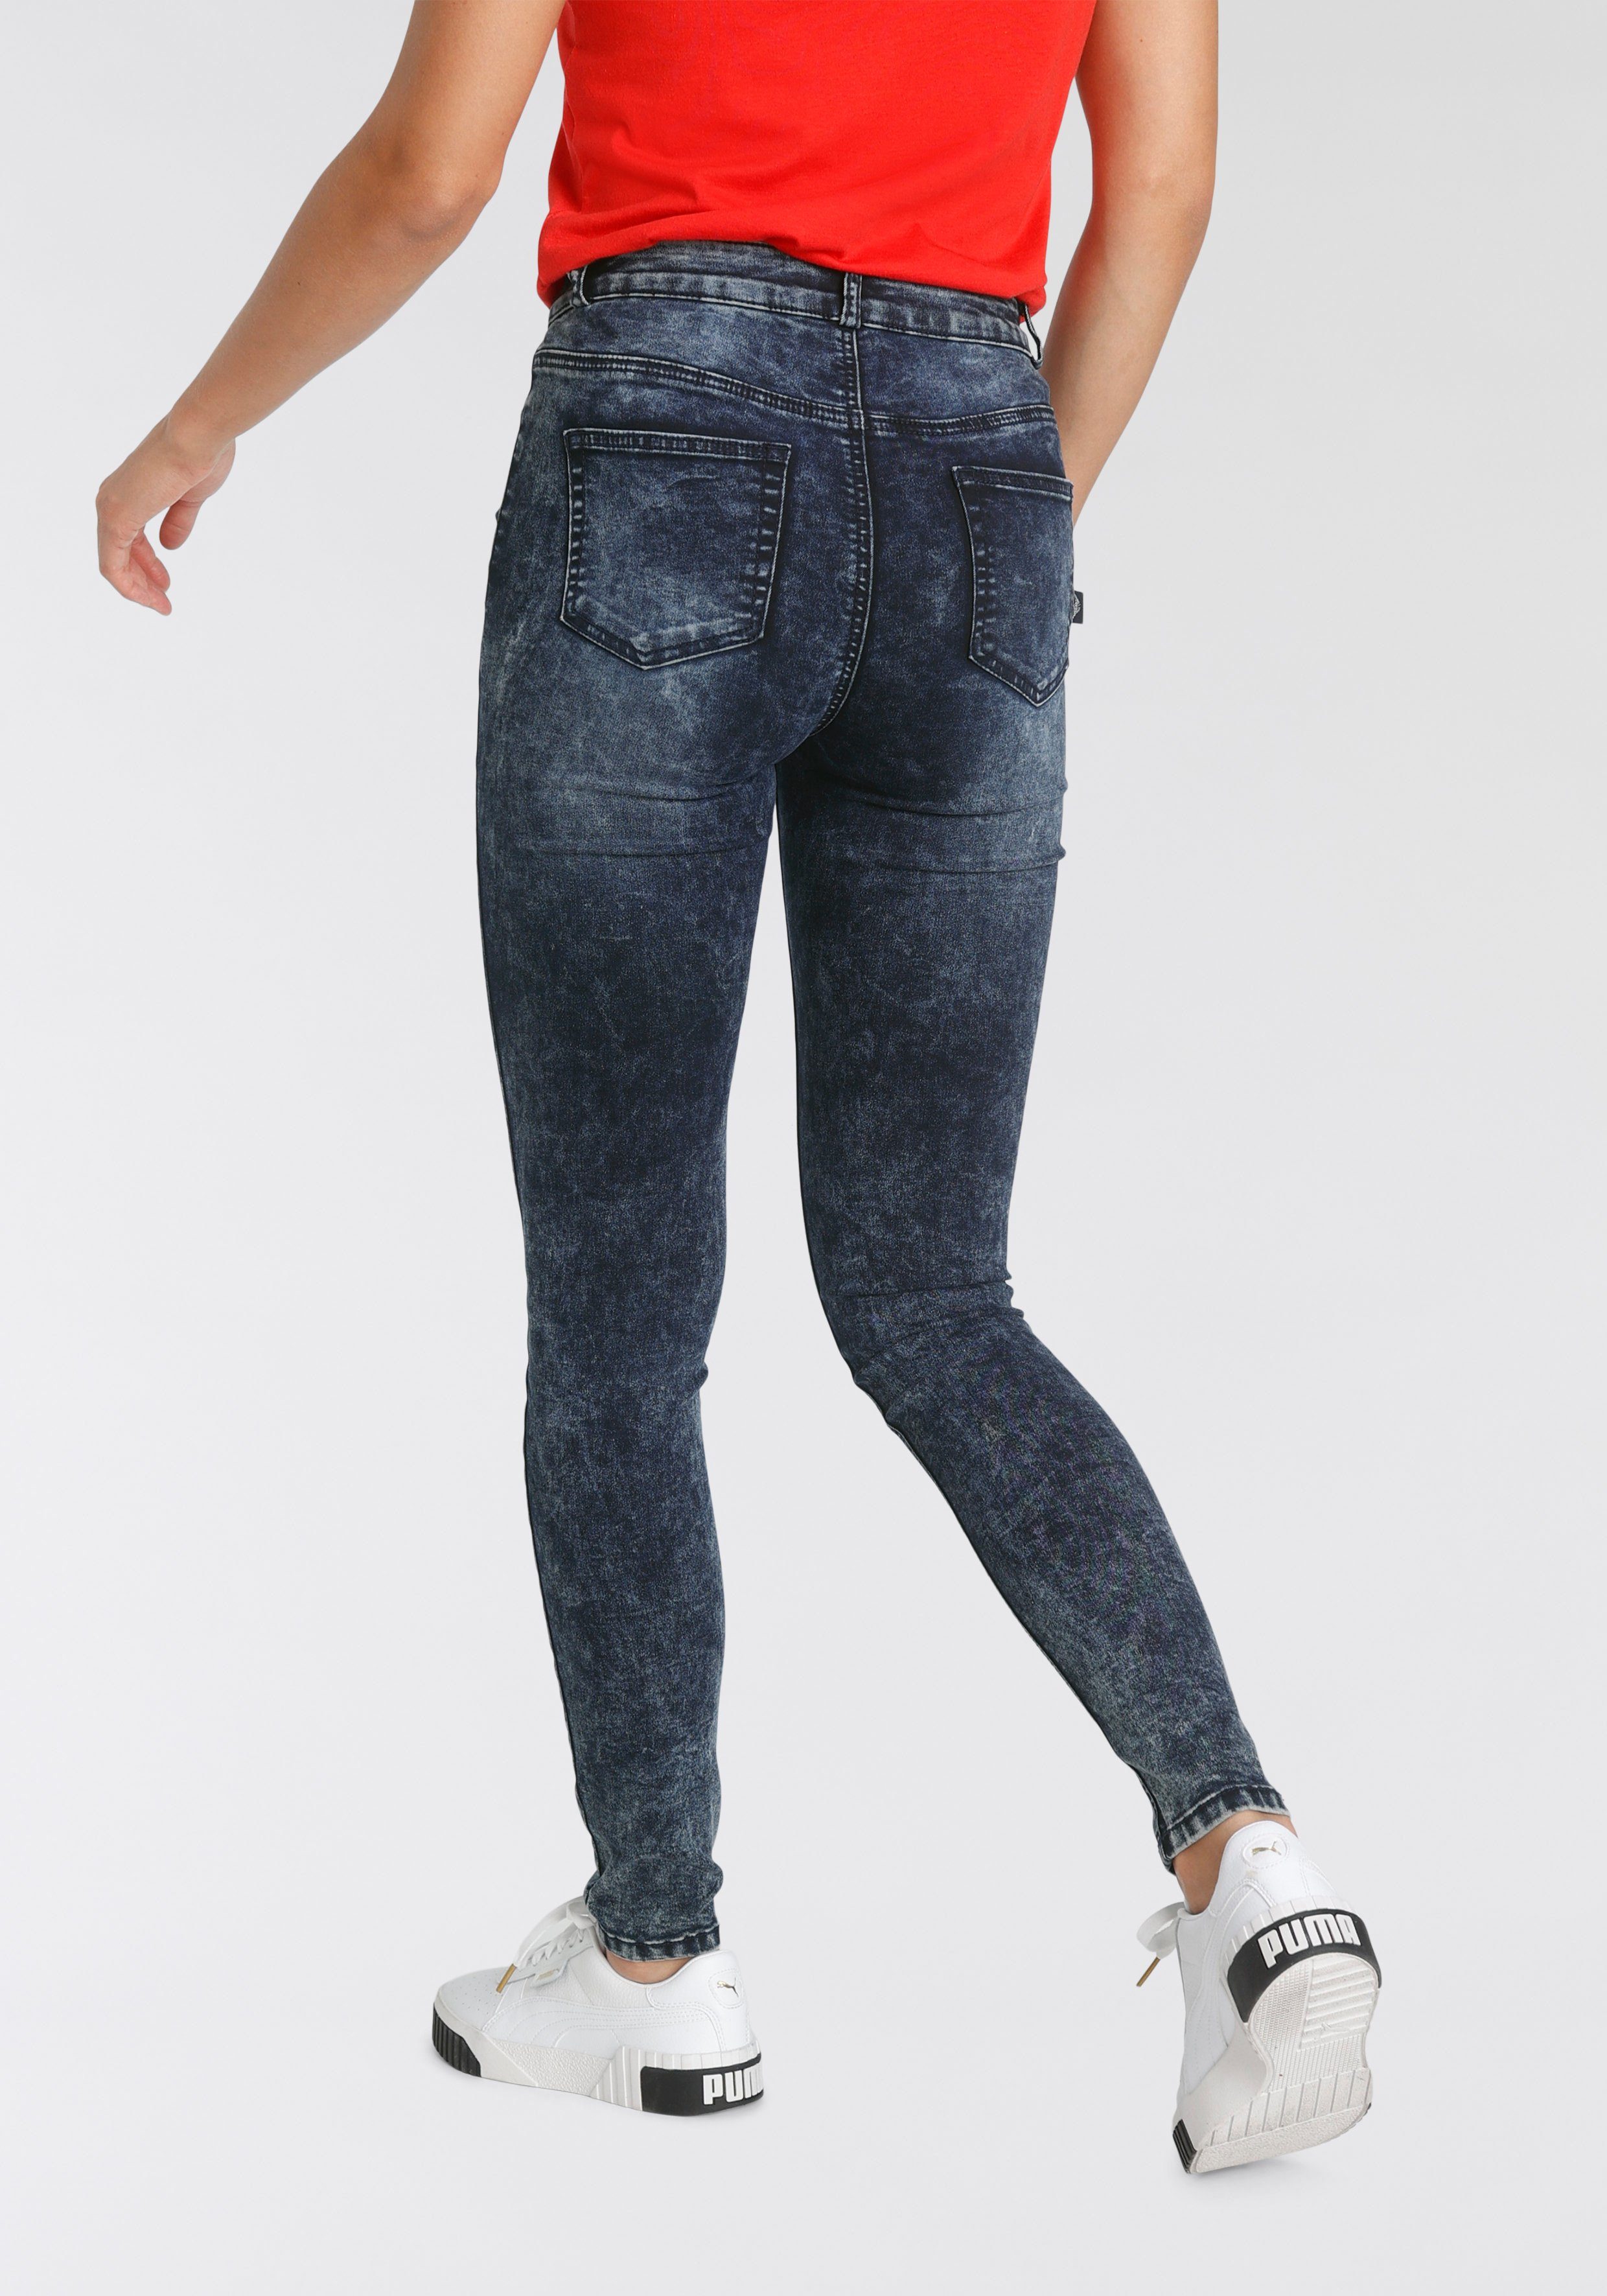 Jeans Ultra Arizona Moonwashed darkblue-moonwashed washed moon Skinny-fit-Jeans Stretch